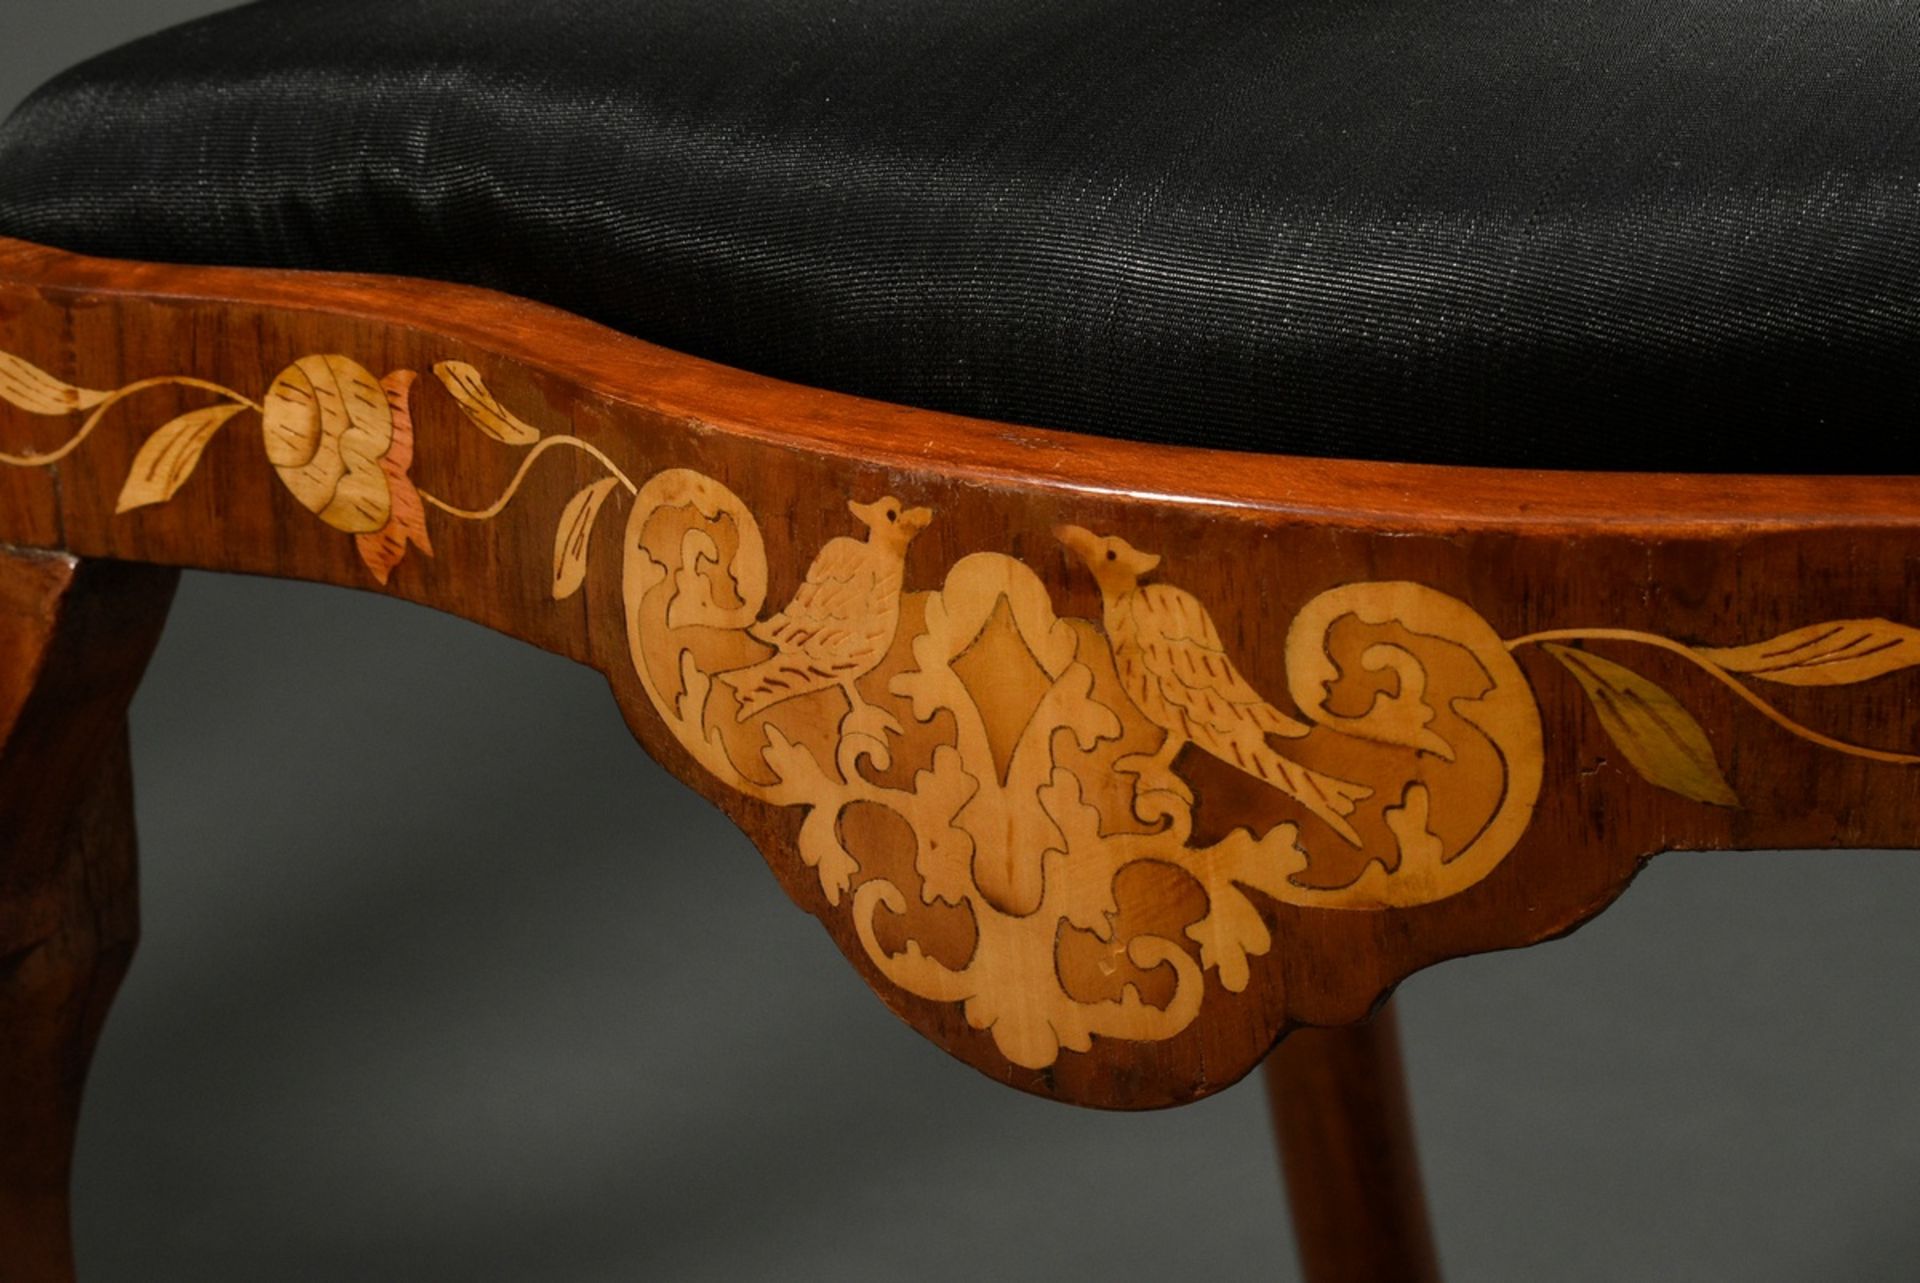 Pair of baroque chairs with elaborately inlaid frames "flower basket and vase with bird" on curved  - Image 5 of 11